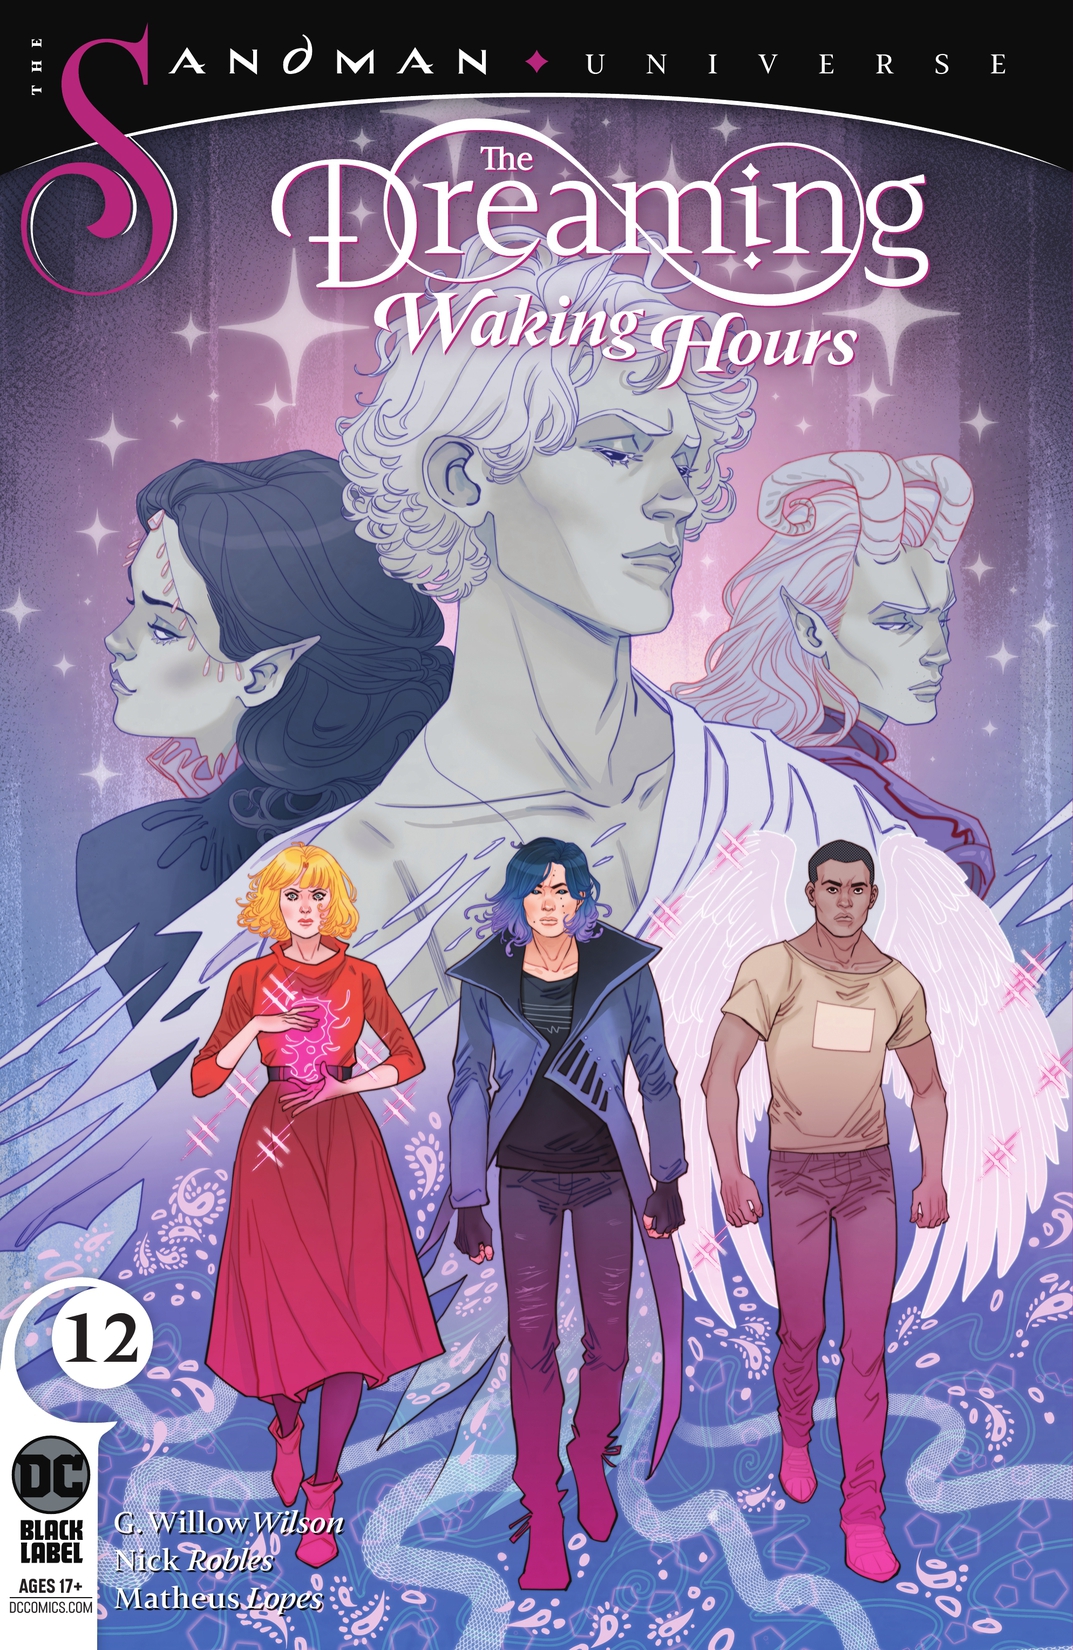 The Dreaming: Waking Hours #12 preview images